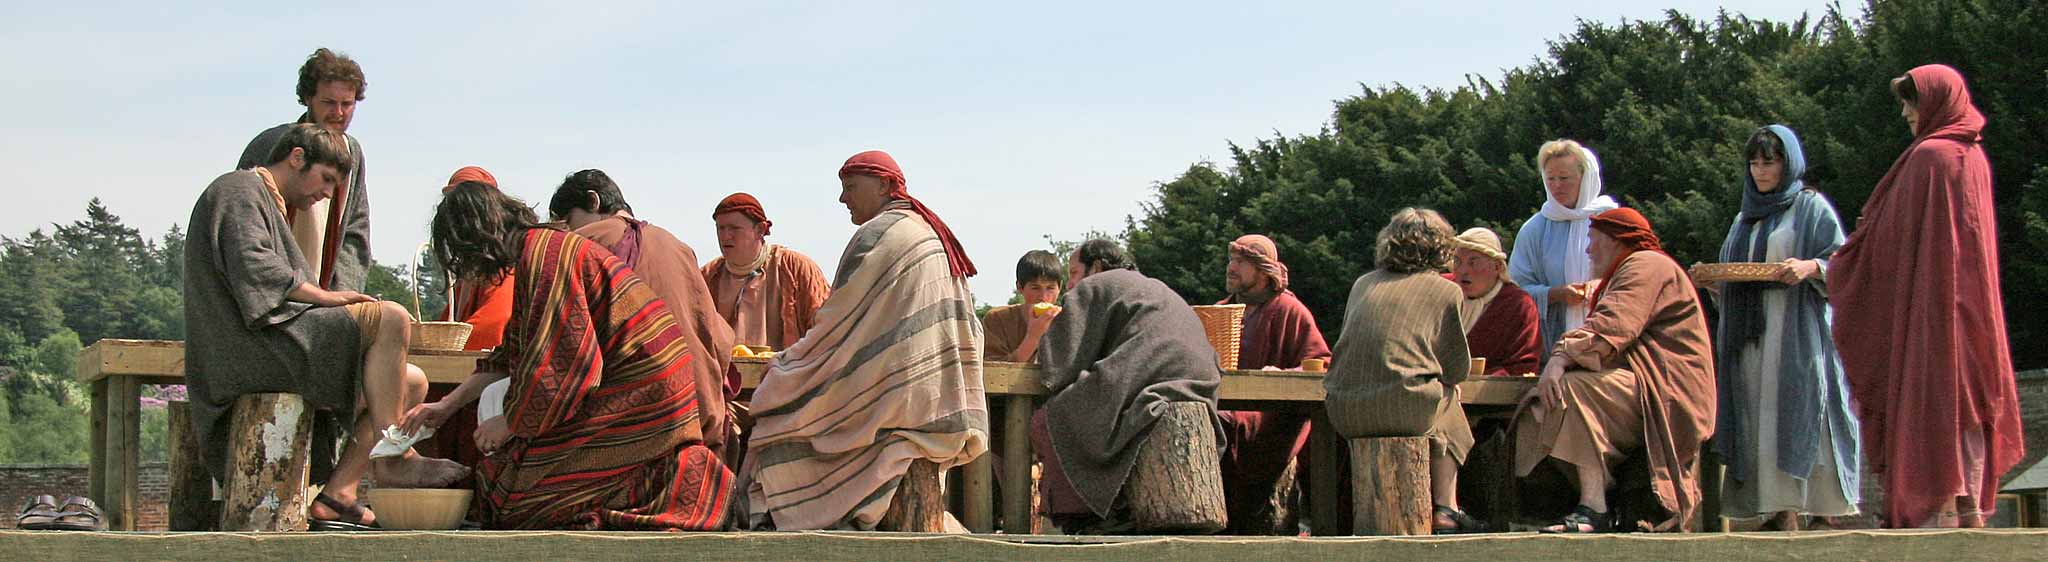 A scene from 'The Life of Jesus Christ' - a play presented at Dundas Castle  -  Jesus washes His Disciples' Feet at the Last Supper